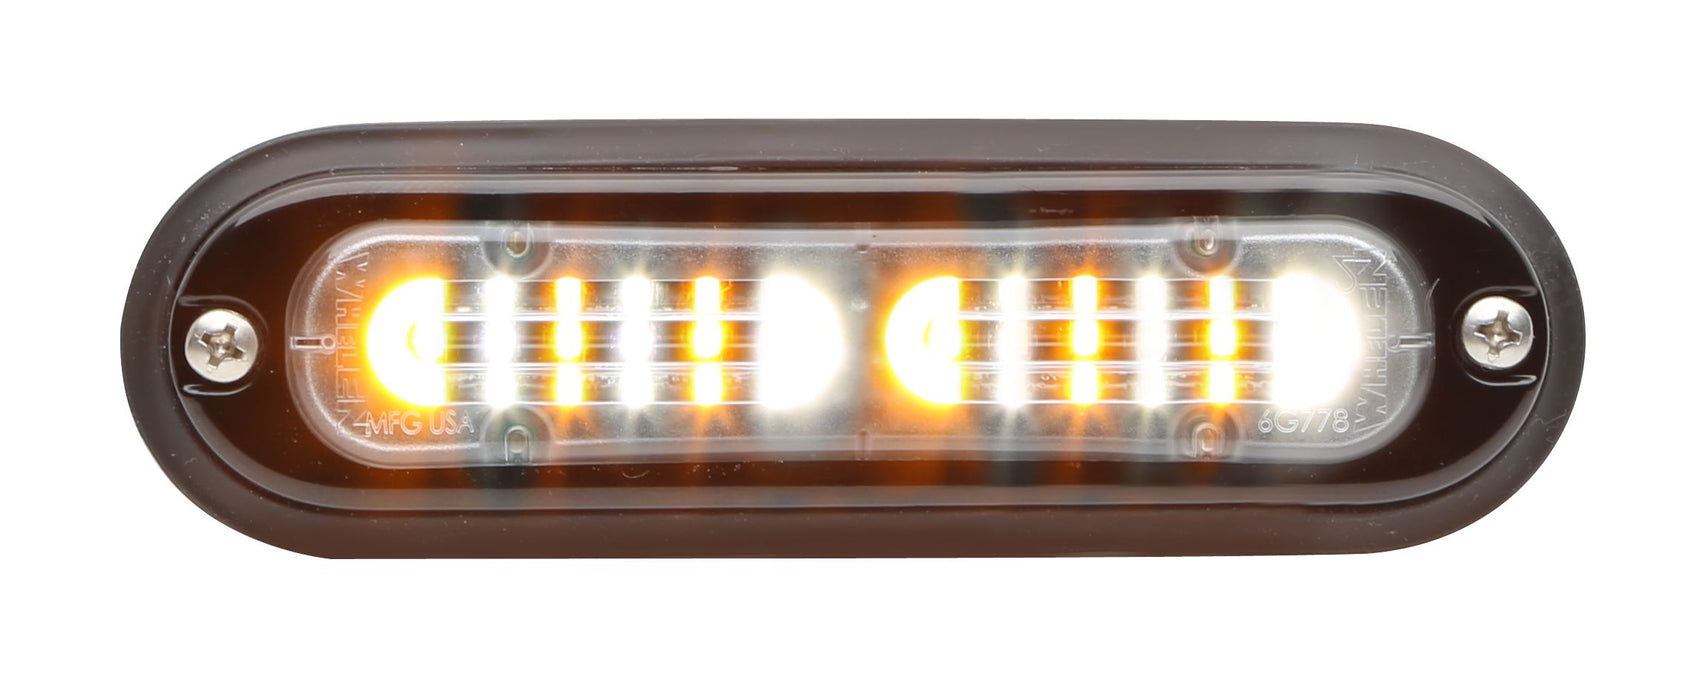 Whelen ION™ T-Series™ Linear Super-LED® Surface Mount Lighthead - DUO / Dual Color